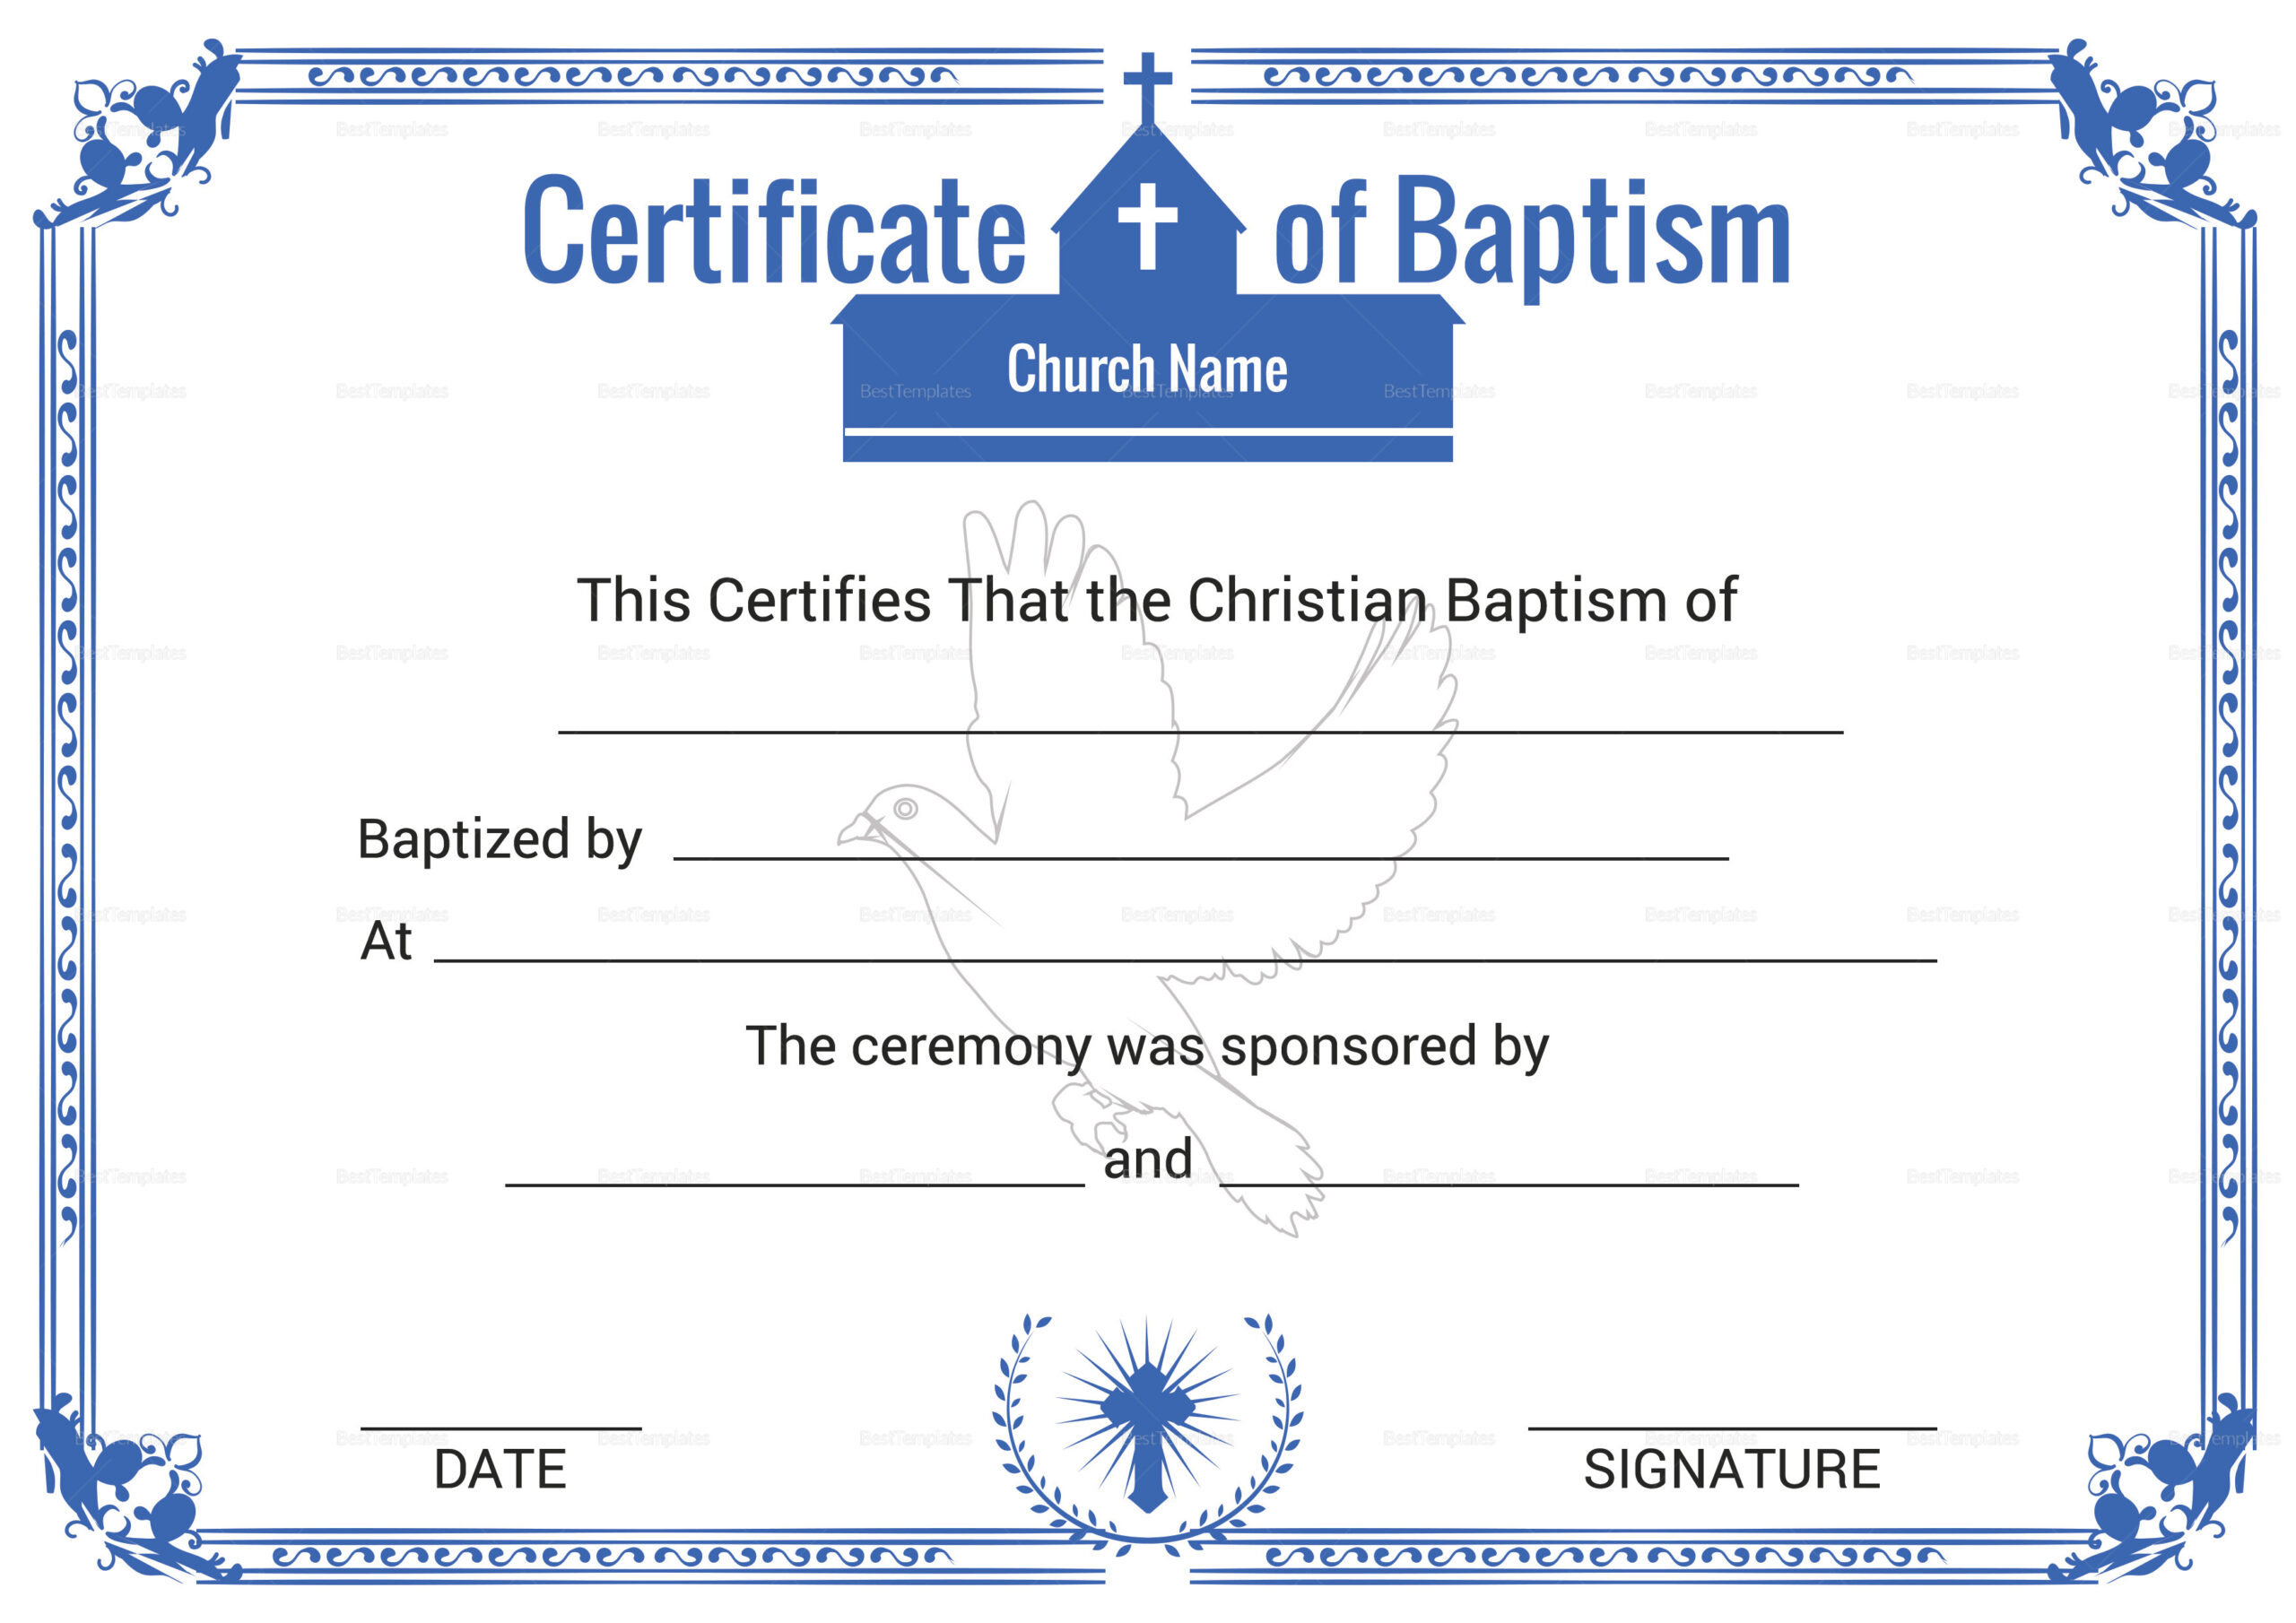 Christian Baptism Certificate Template In Adobe Photoshop  Intended For Christian Baptism Certificate Template